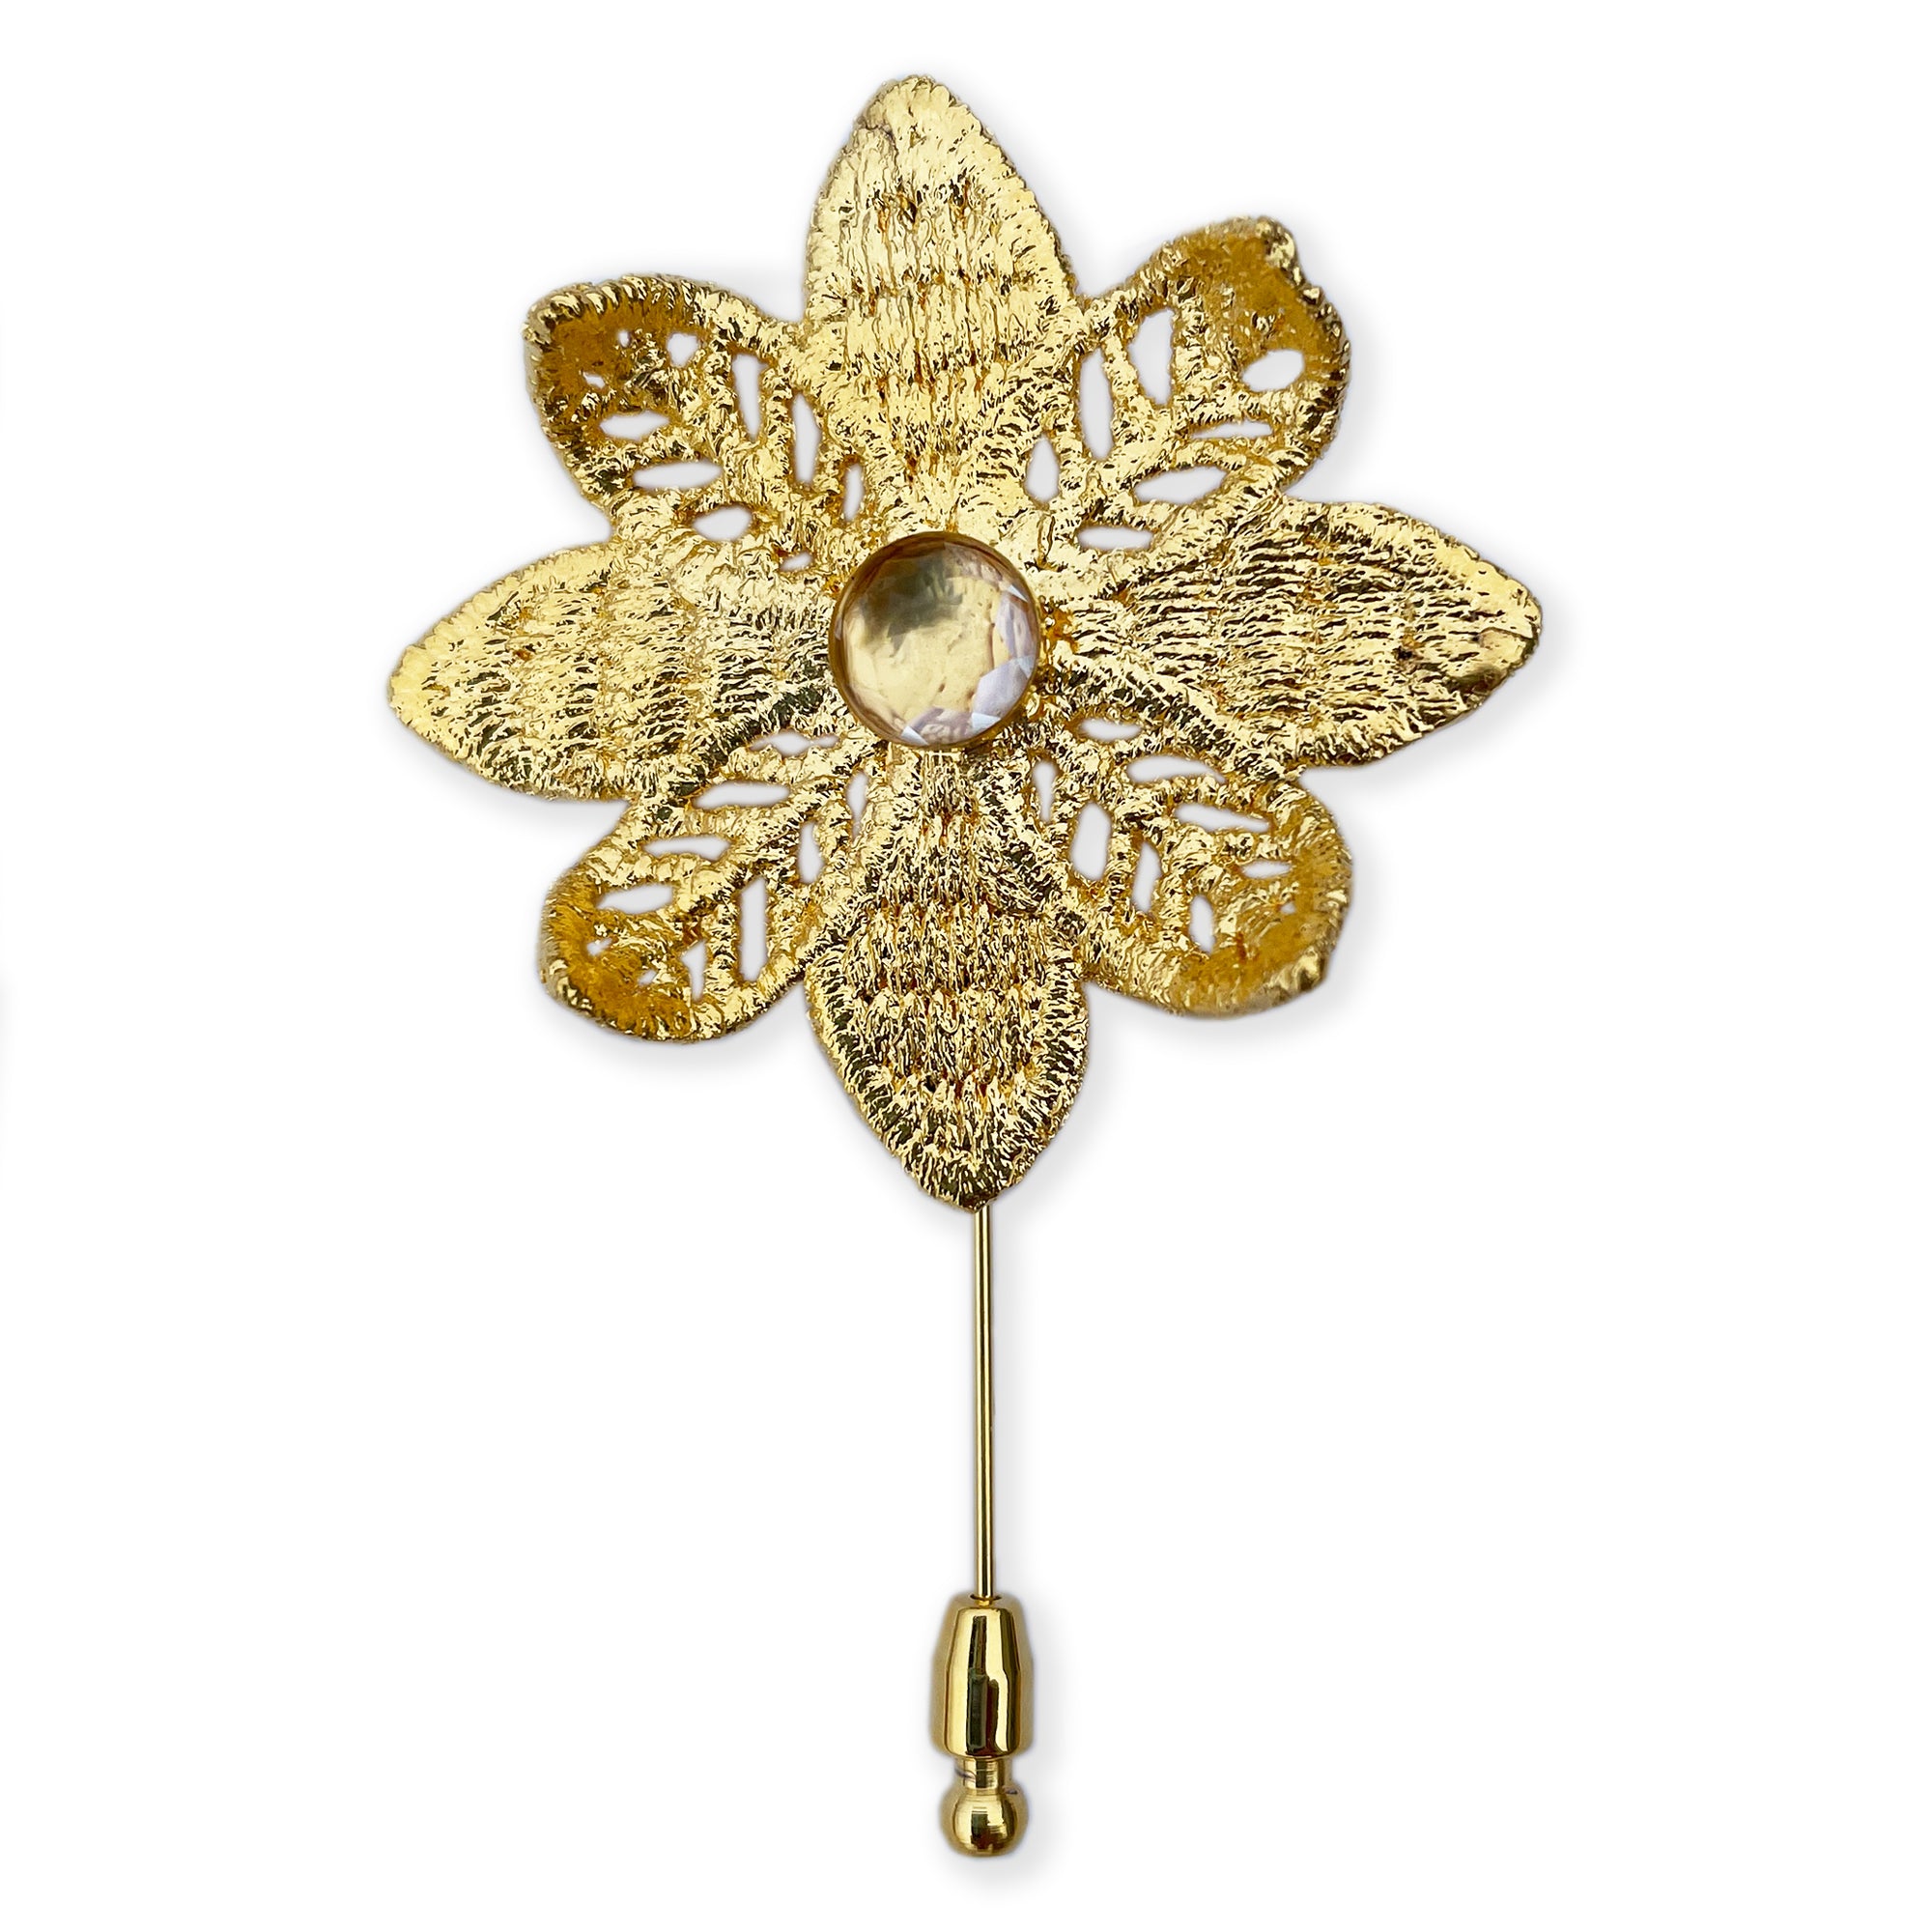 Lapel pin 24k gold lace flower with 10mm white Topaz.